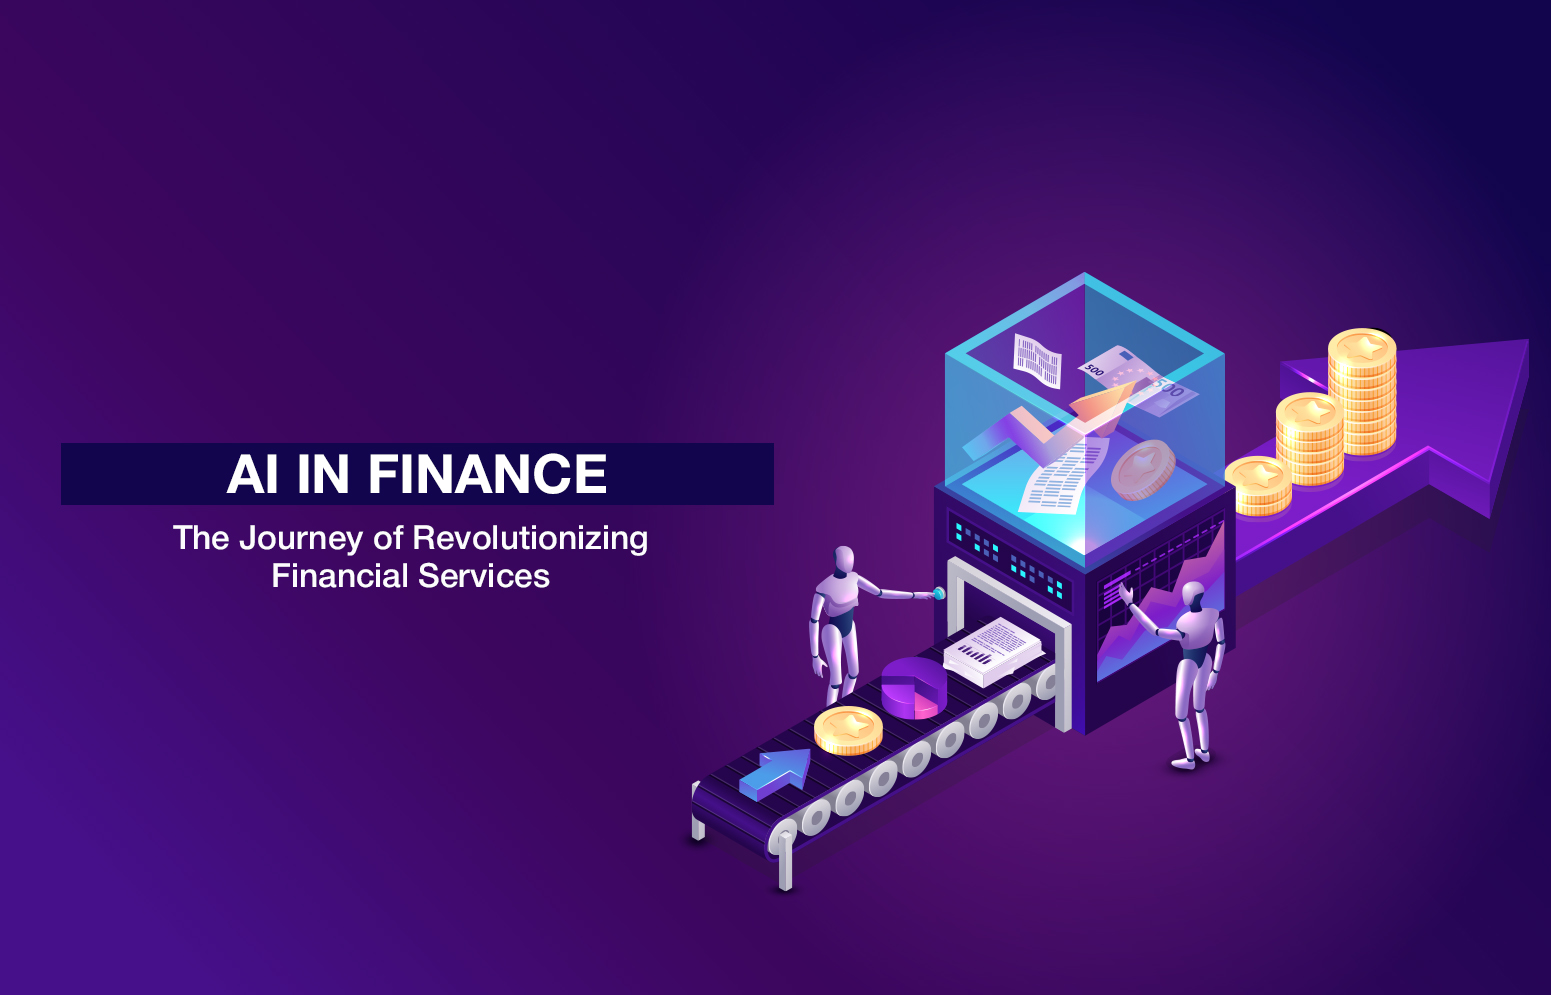 AI in Finance – The Journey of Revolutionizing Financial Services